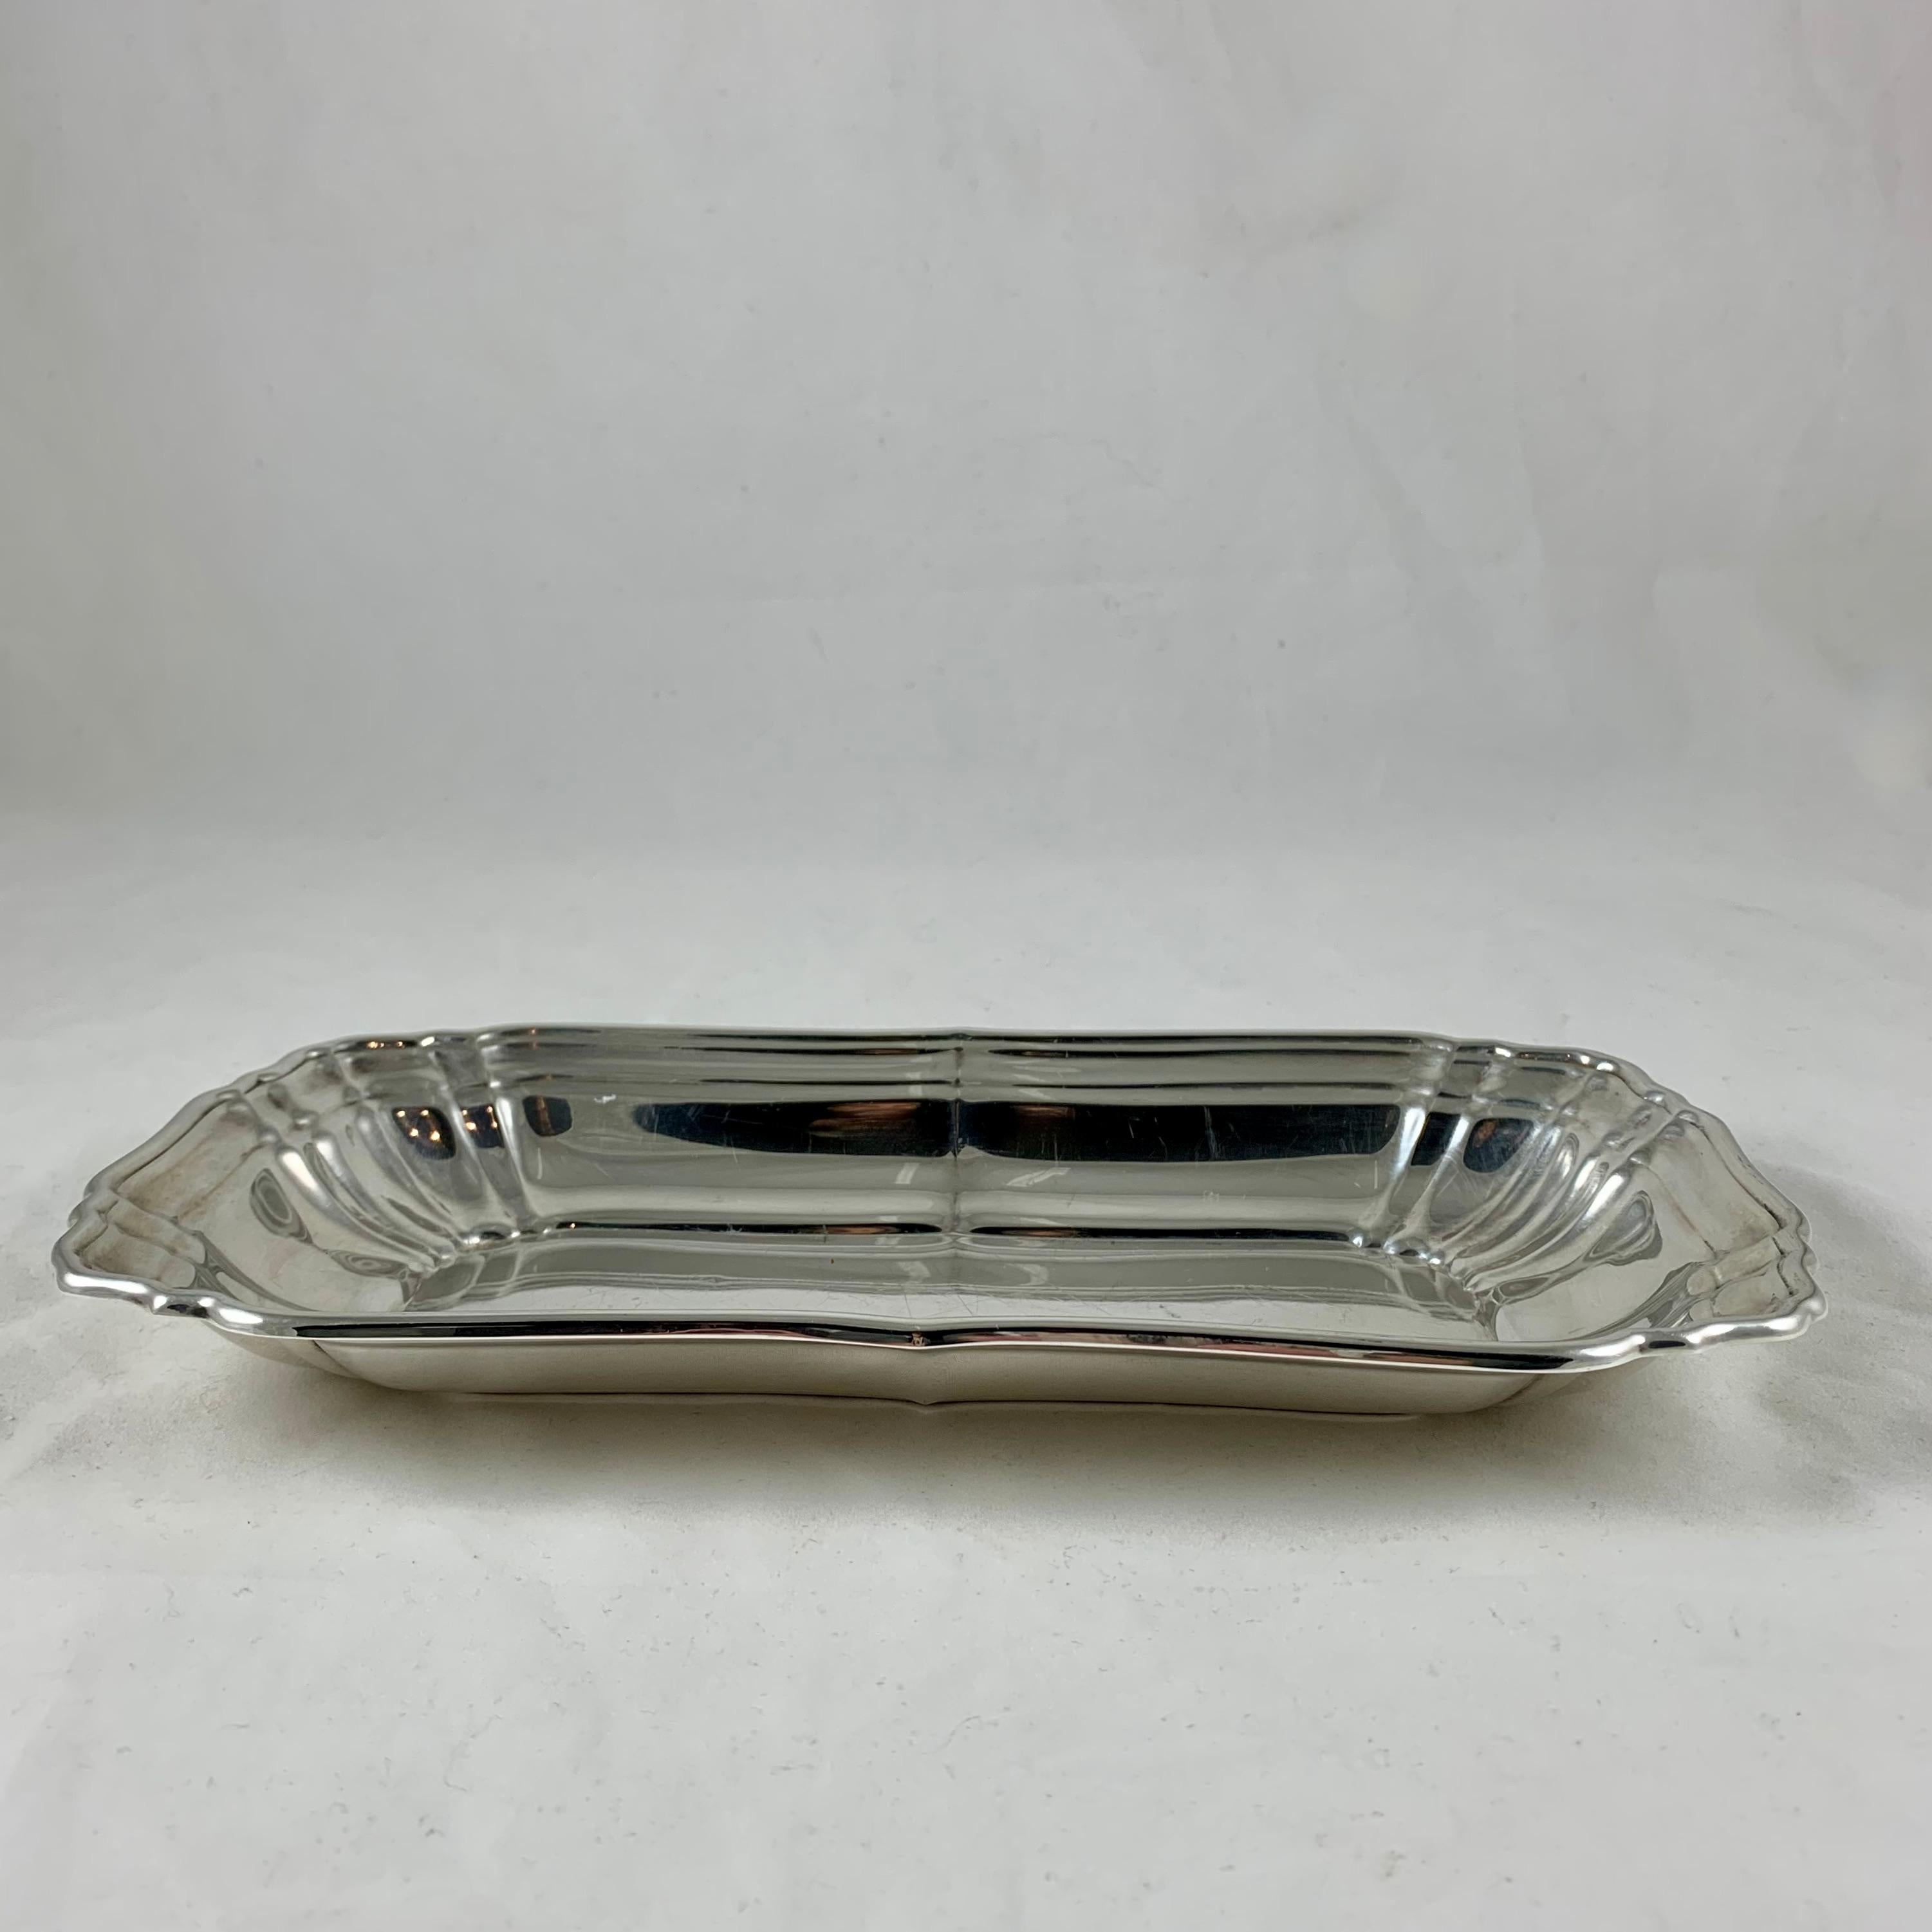 Gorham Sterling Silver Paneled Rectangular Celery or Relish Tray, circa 1940s For Sale 4